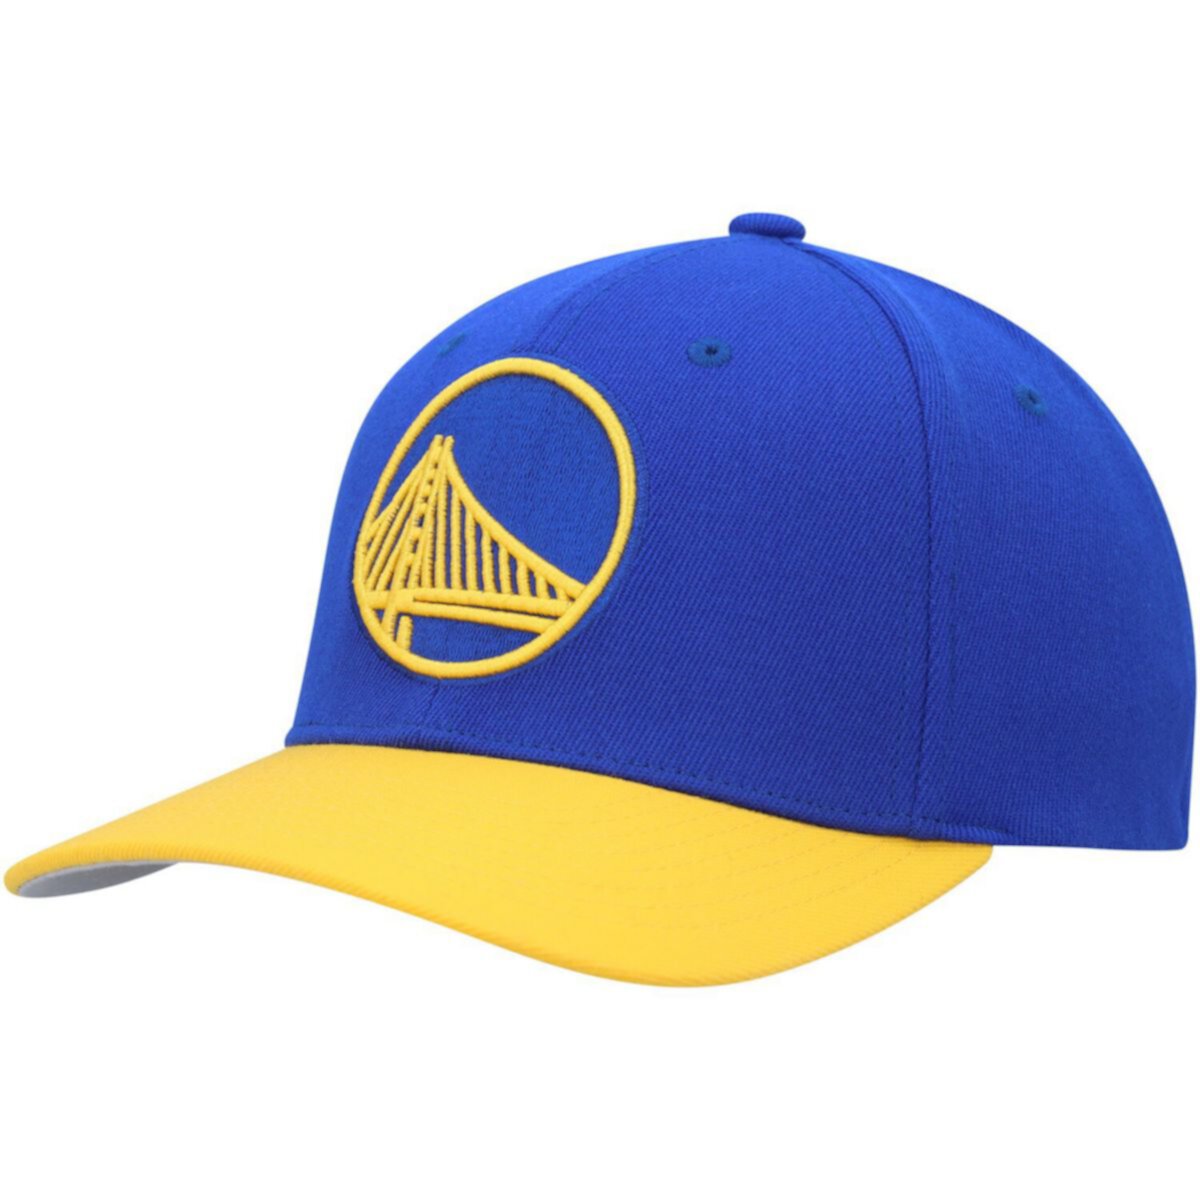 Men's Mitchell & Ness Royal/Gold Golden State Warriors MVP Team Two-Tone 2.0 Stretch-Snapback Hat Mitchell & Ness